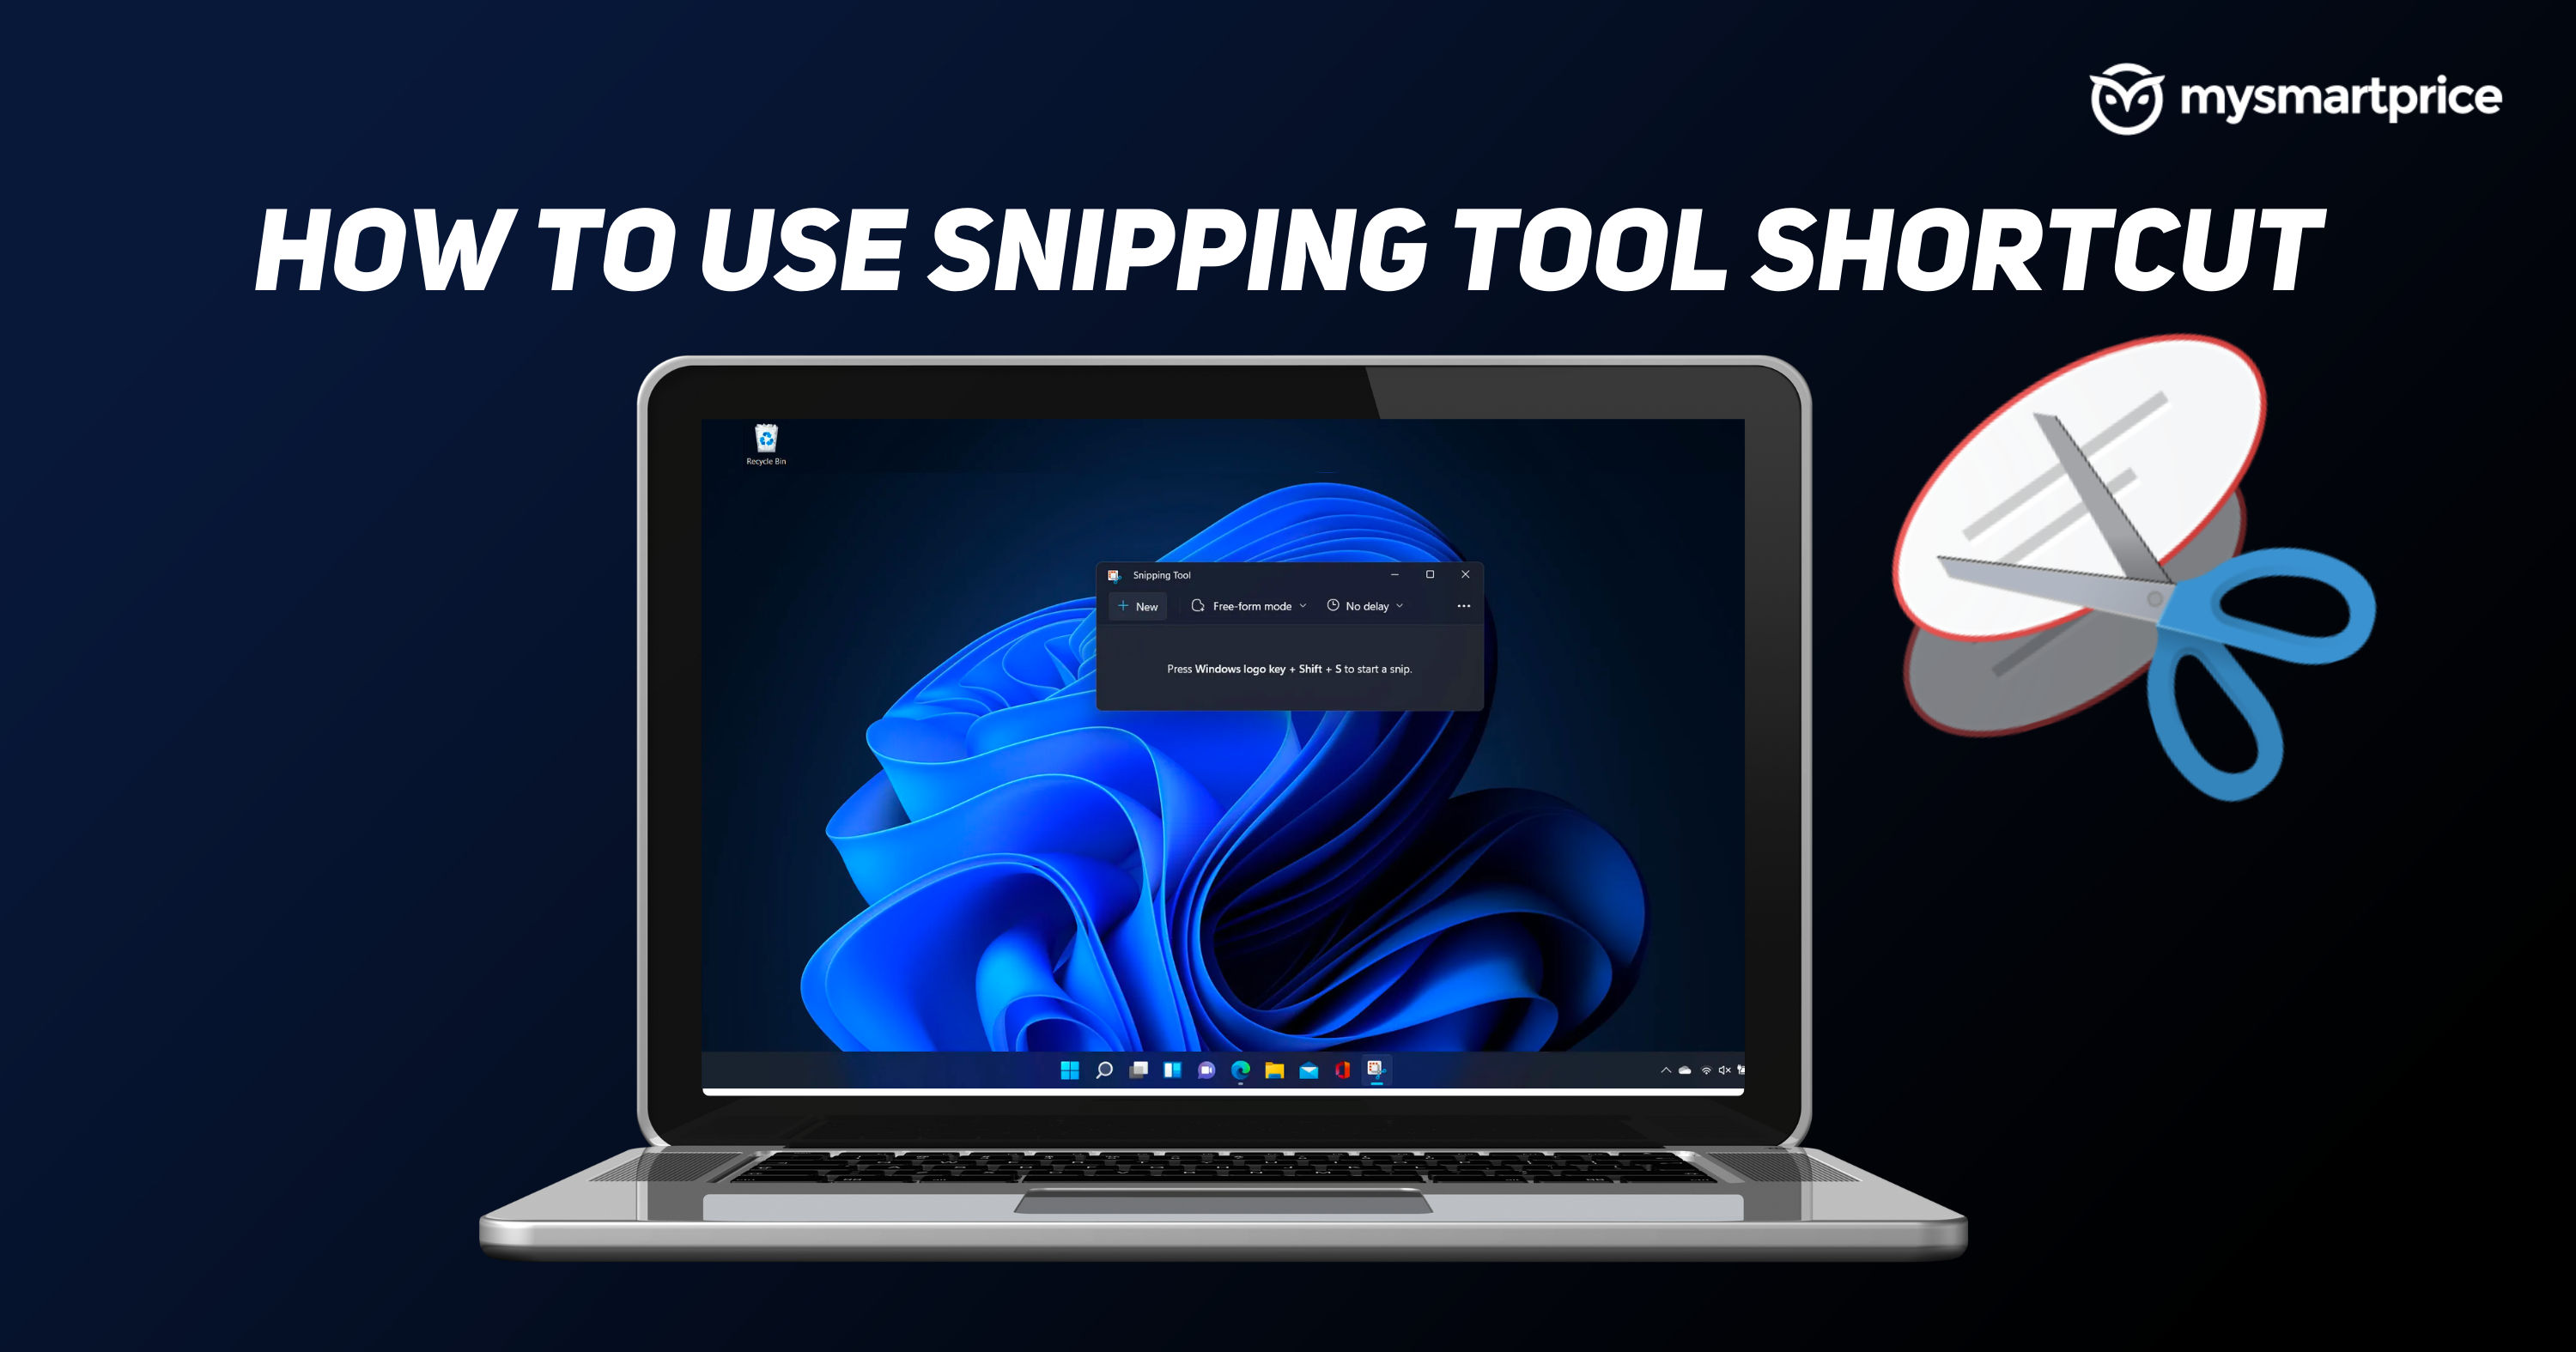 Snipping Tool Shortcut How To Use Snipping Tool In Windows Laptops